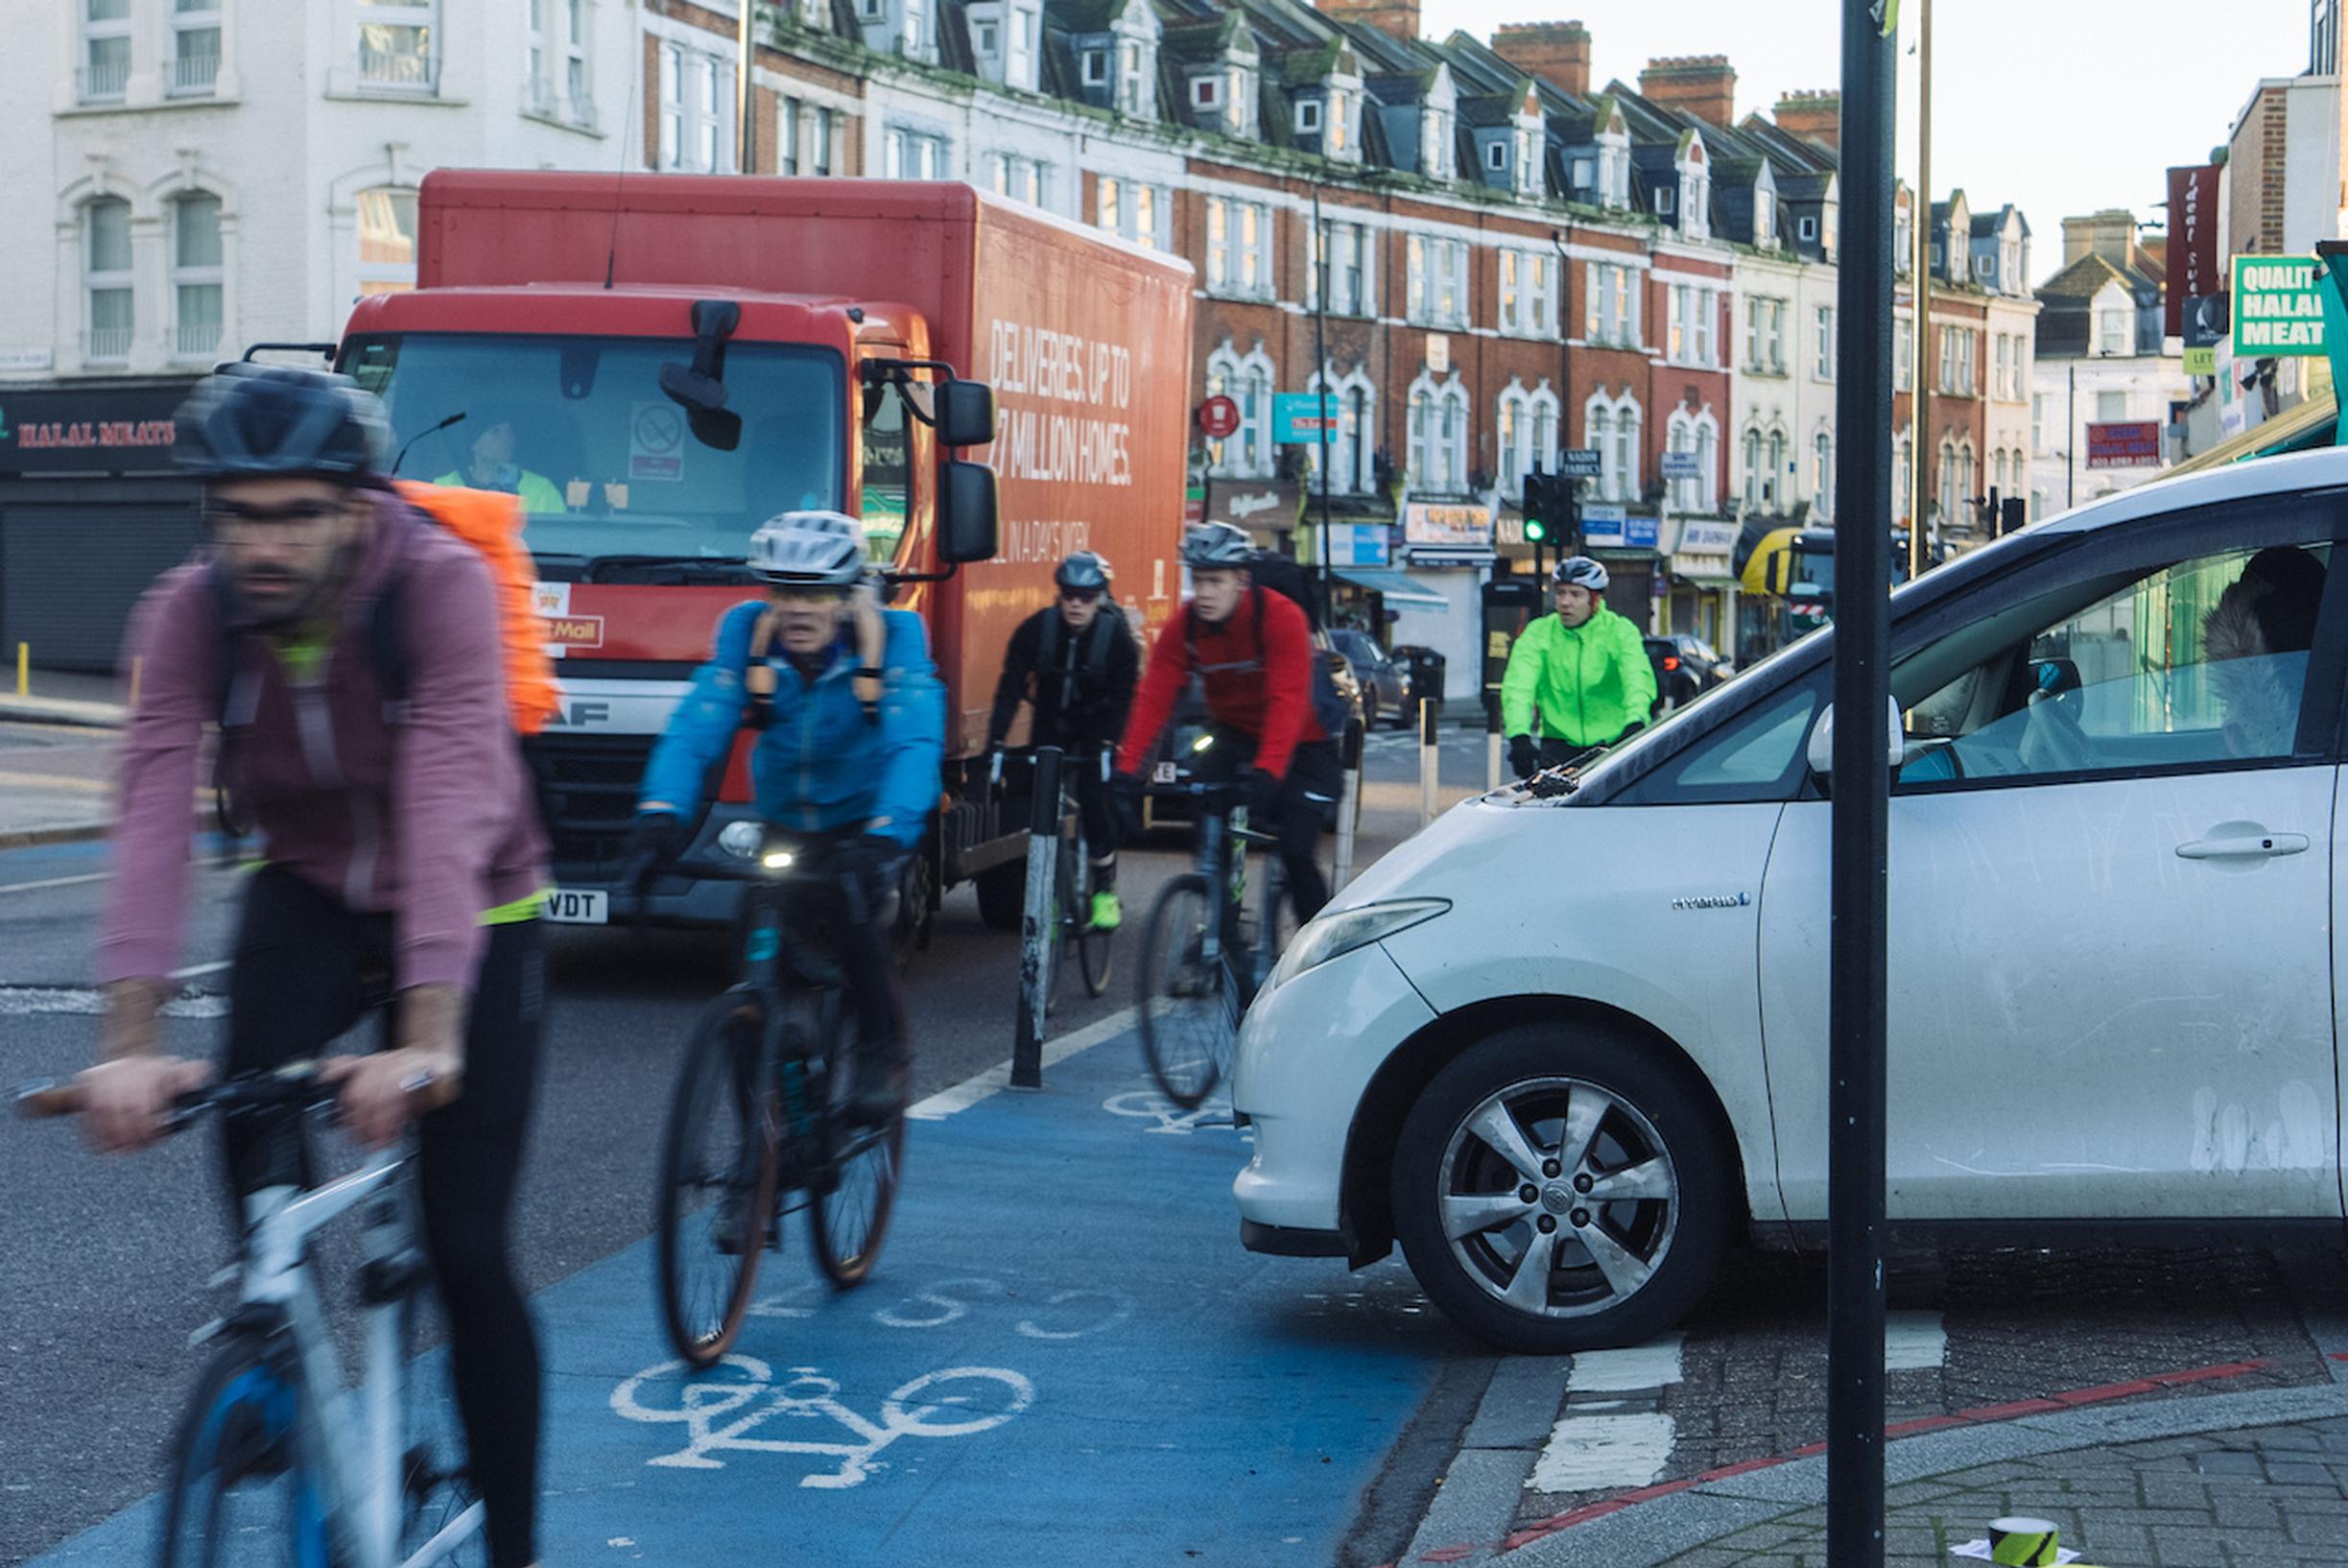 LCC’s worst junction cluster for road danger in London: a few side streets off a main road in Wandsworth that cross the cycle tracks on Cycle Superhighway 7. PIC: Calvin Cheung